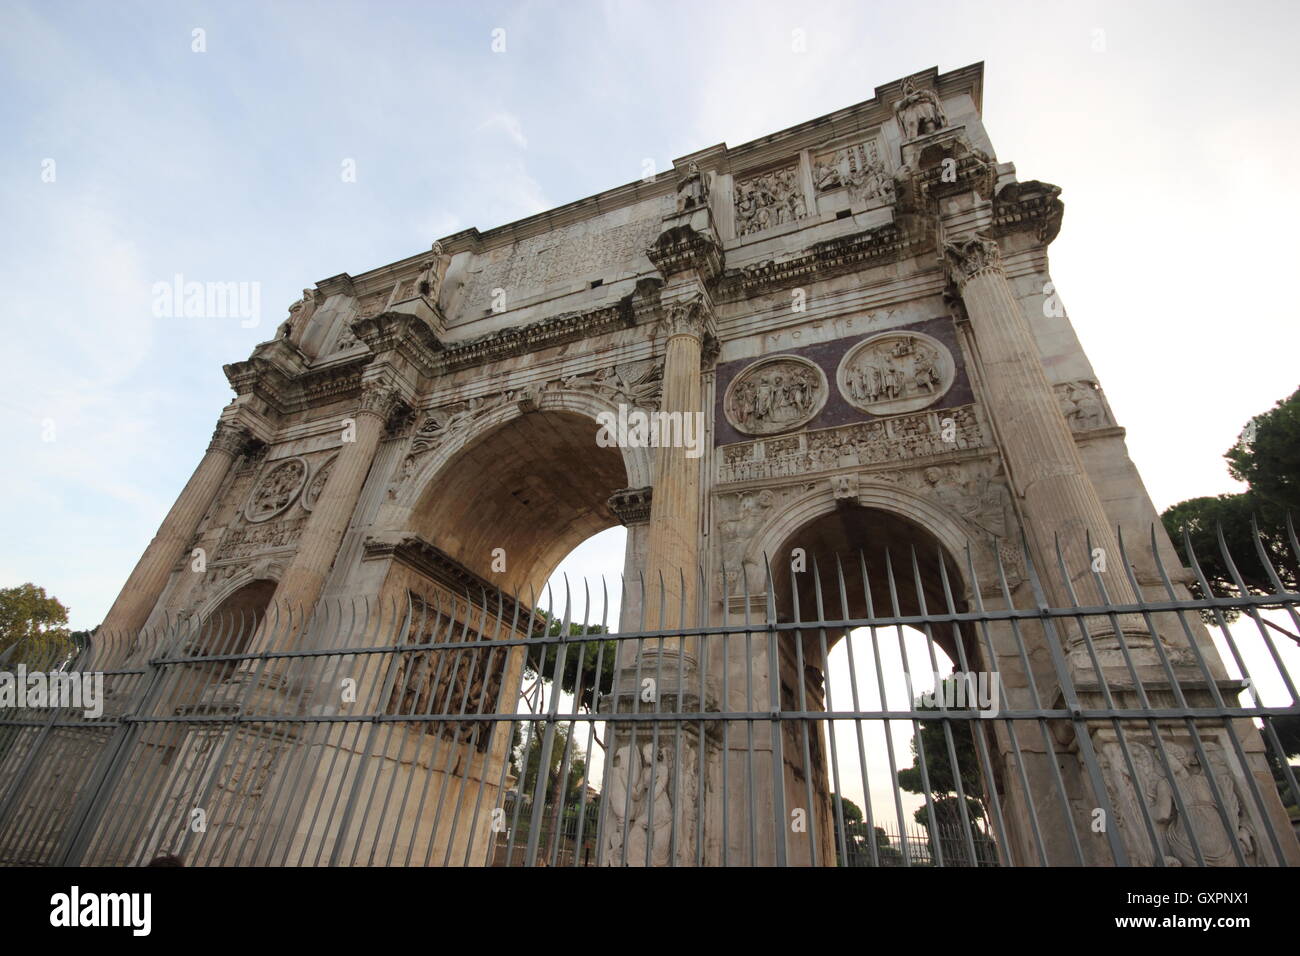 The famous Arch of Costantin, Arco di Costantino Roma, Rome, Italy, trave Stock Photo